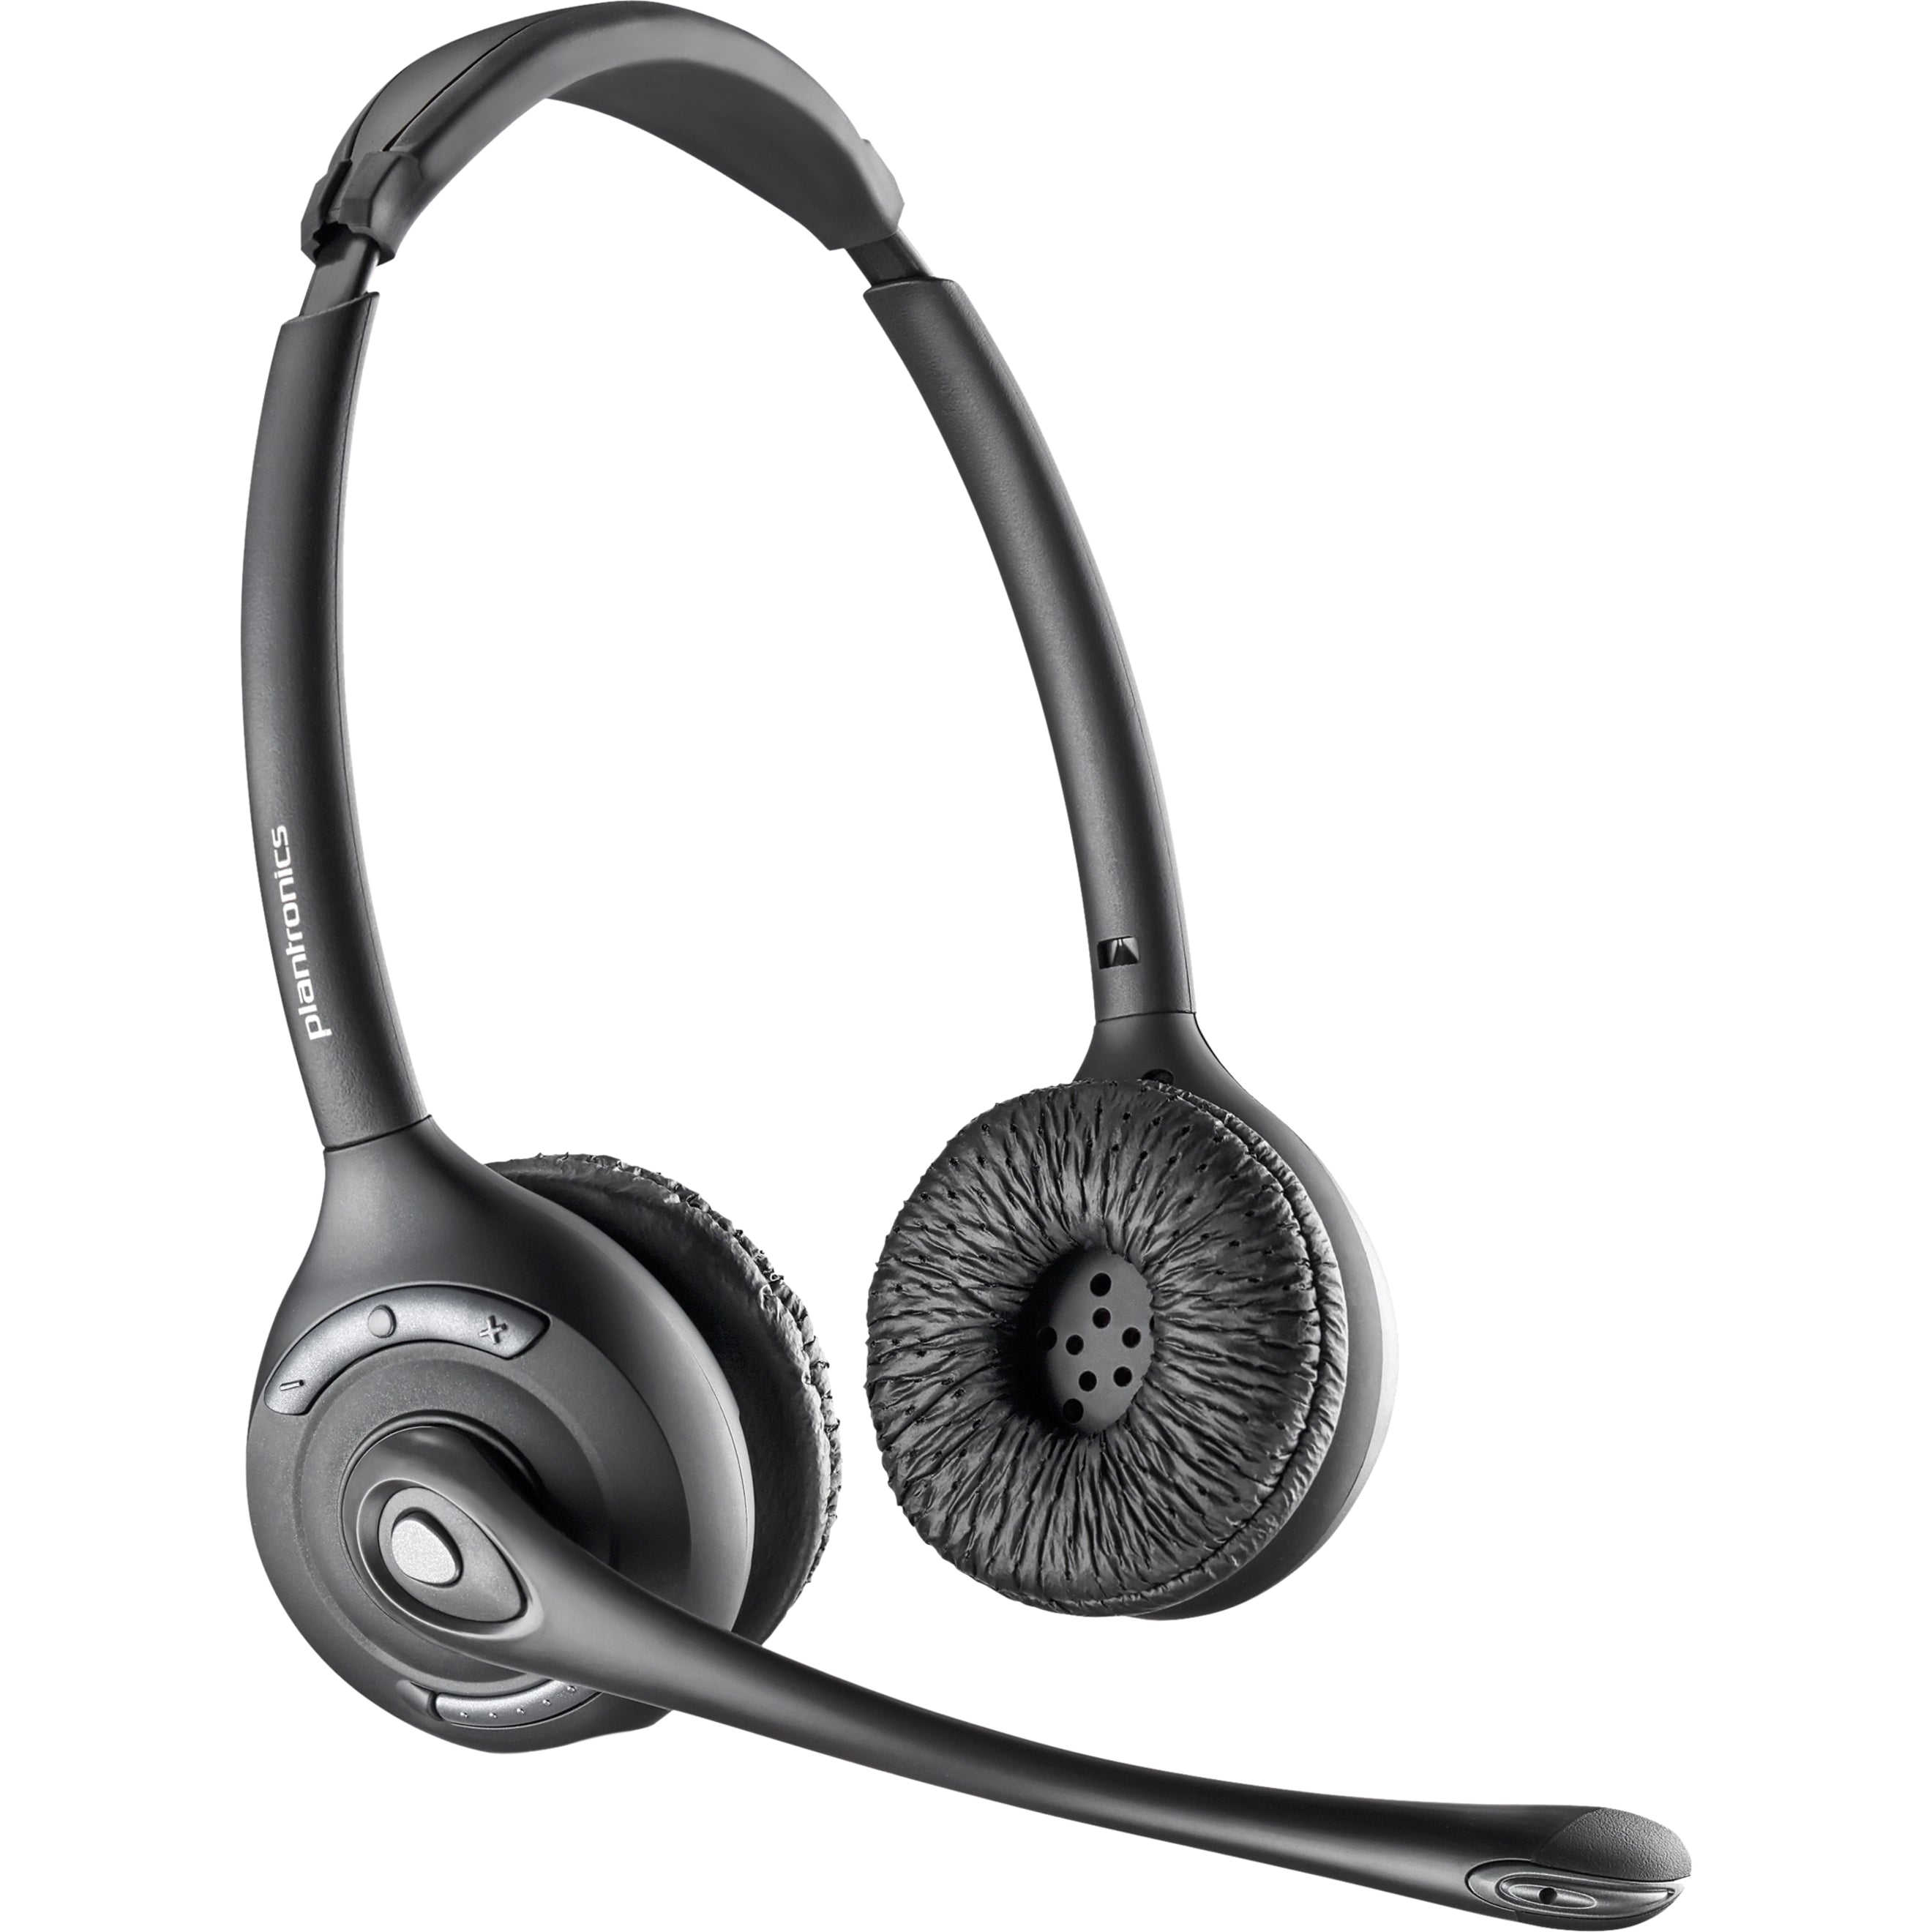 Plantronics Wireless Headset - DECT 6.0 [Discontinued]